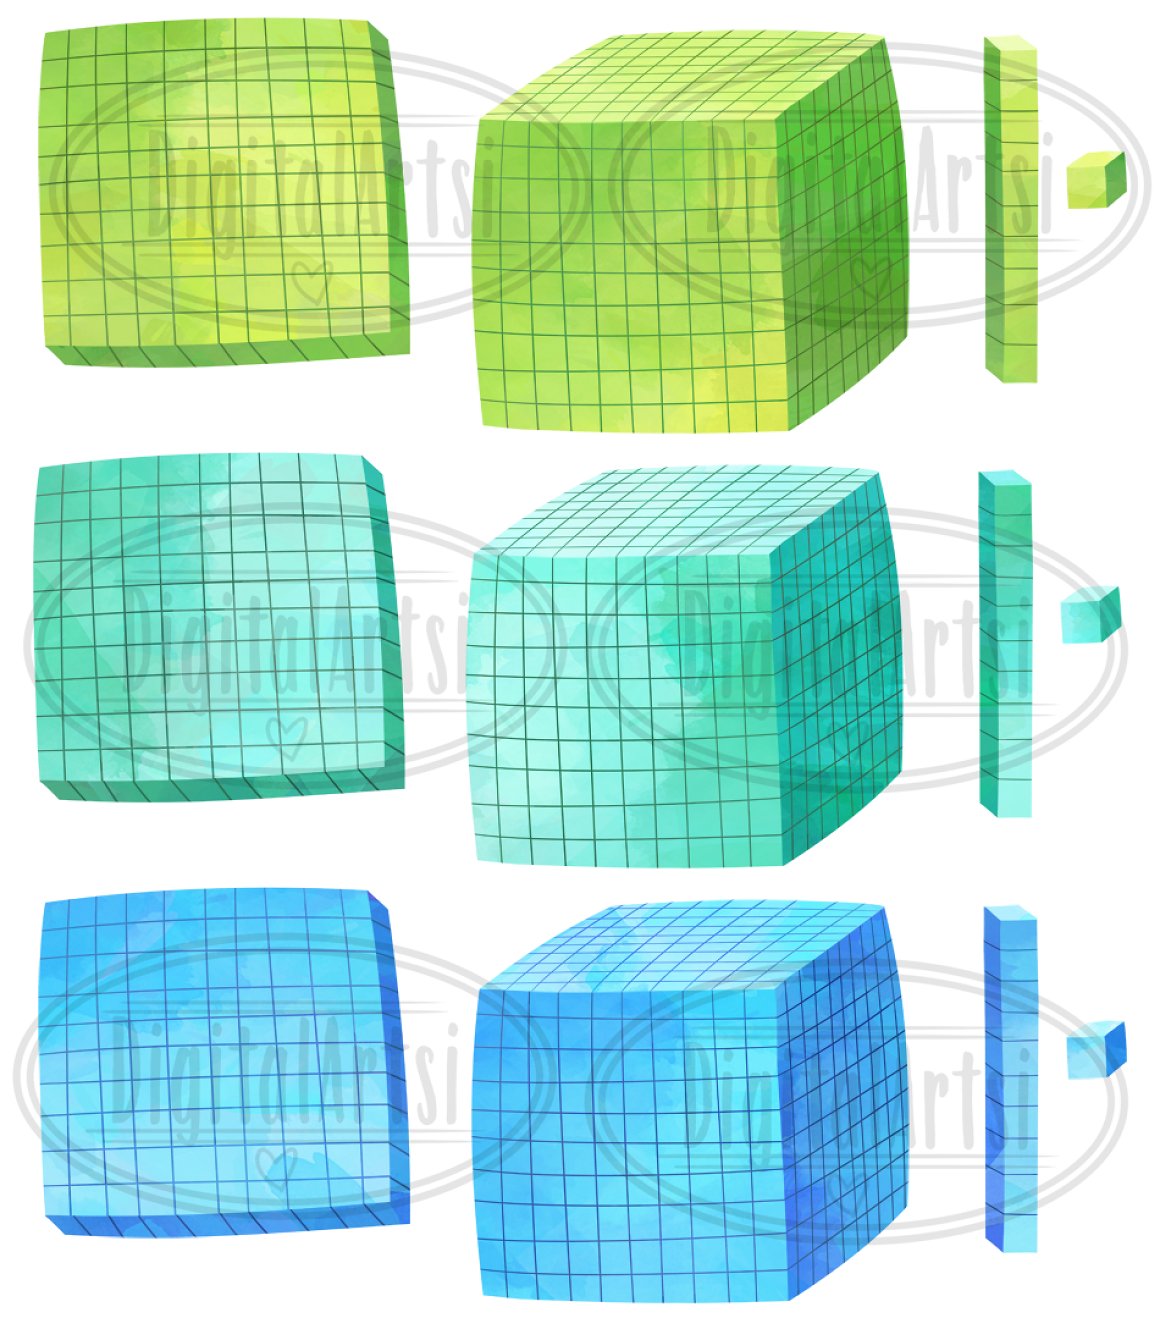 Green and blue cube and square image.